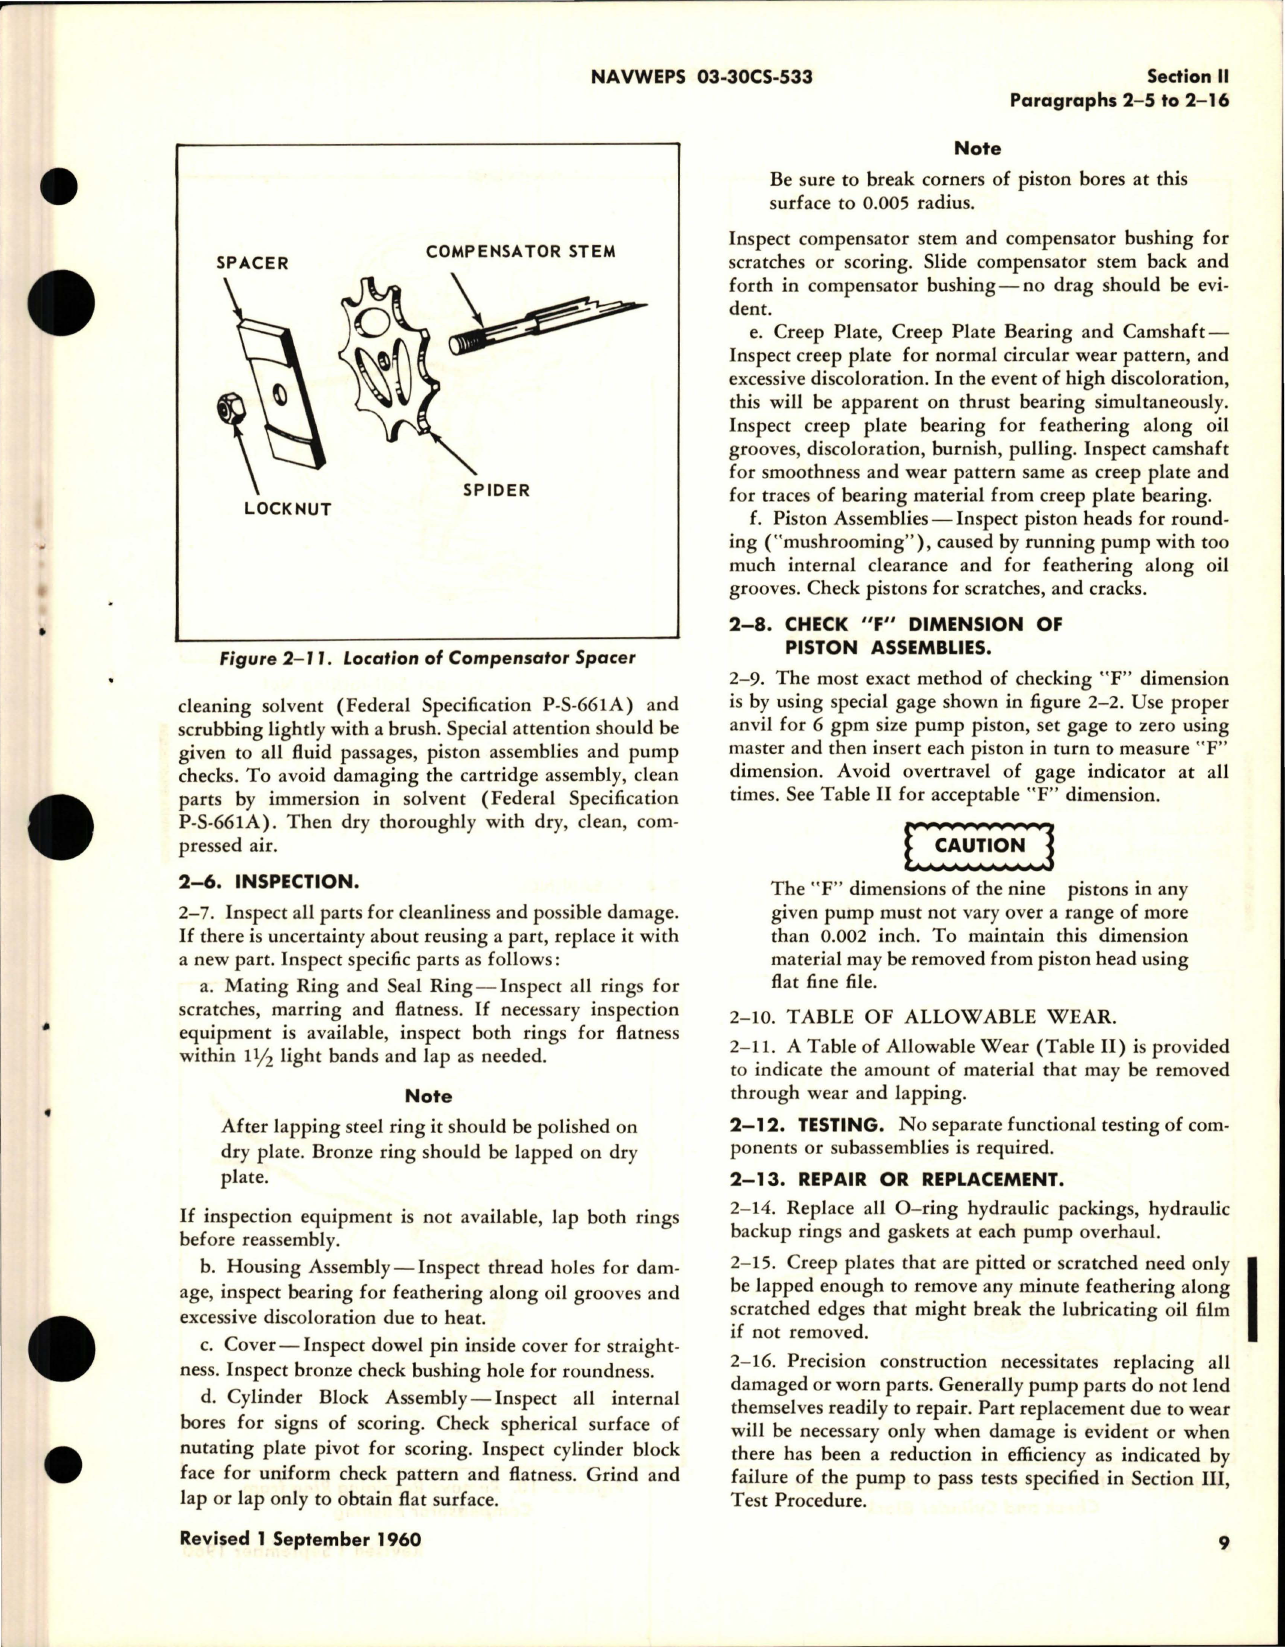 Sample page 7 from AirCorps Library document: Overhaul Instructions for Stratopower Hydraulic Pumps